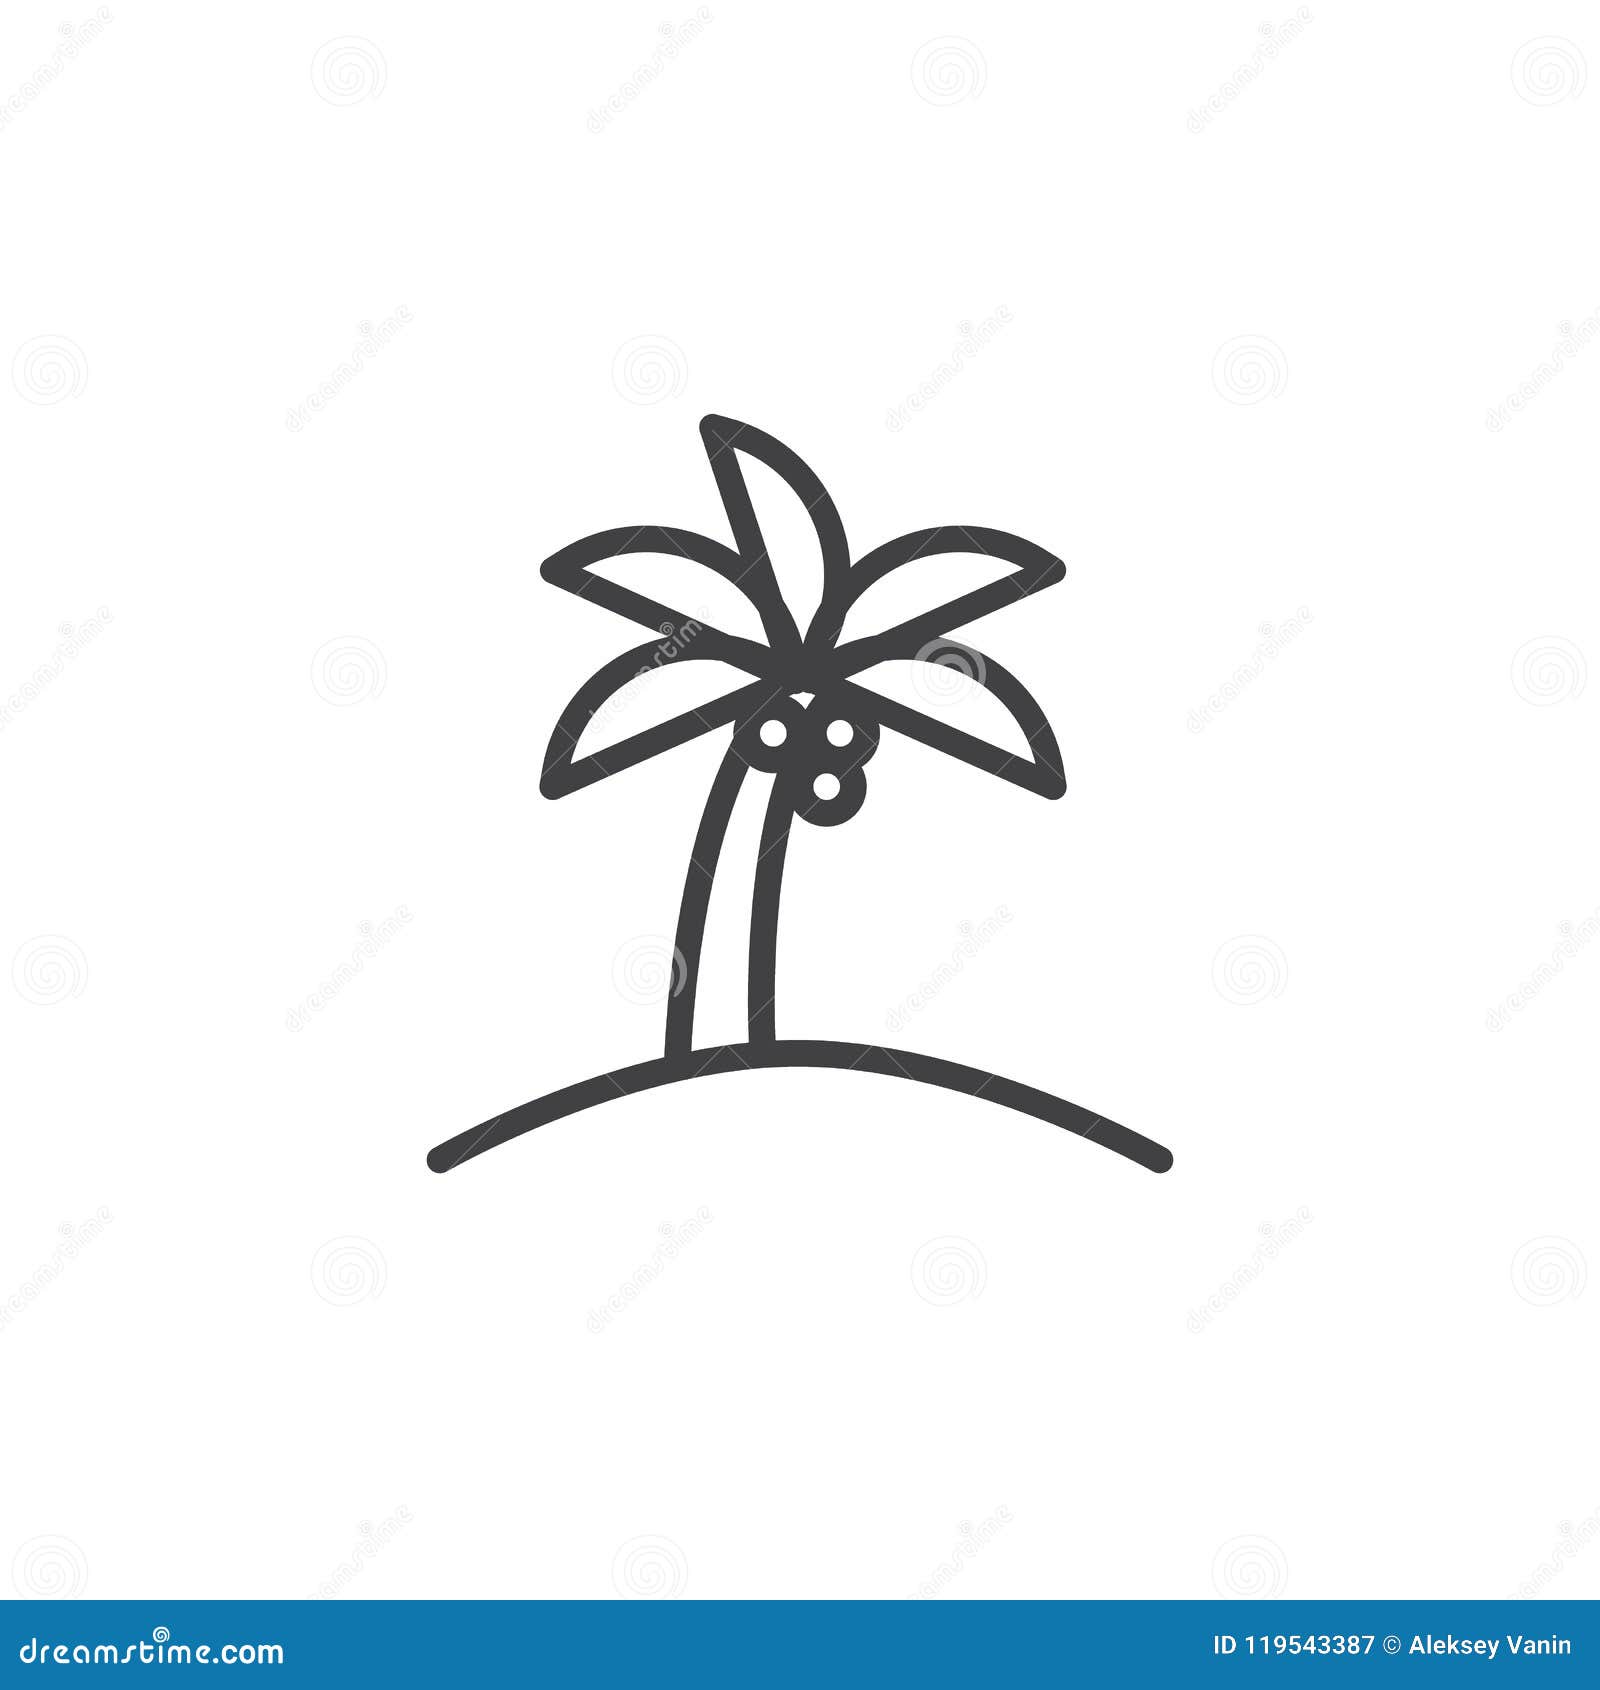 How to Draw a Coconut Palm Tree